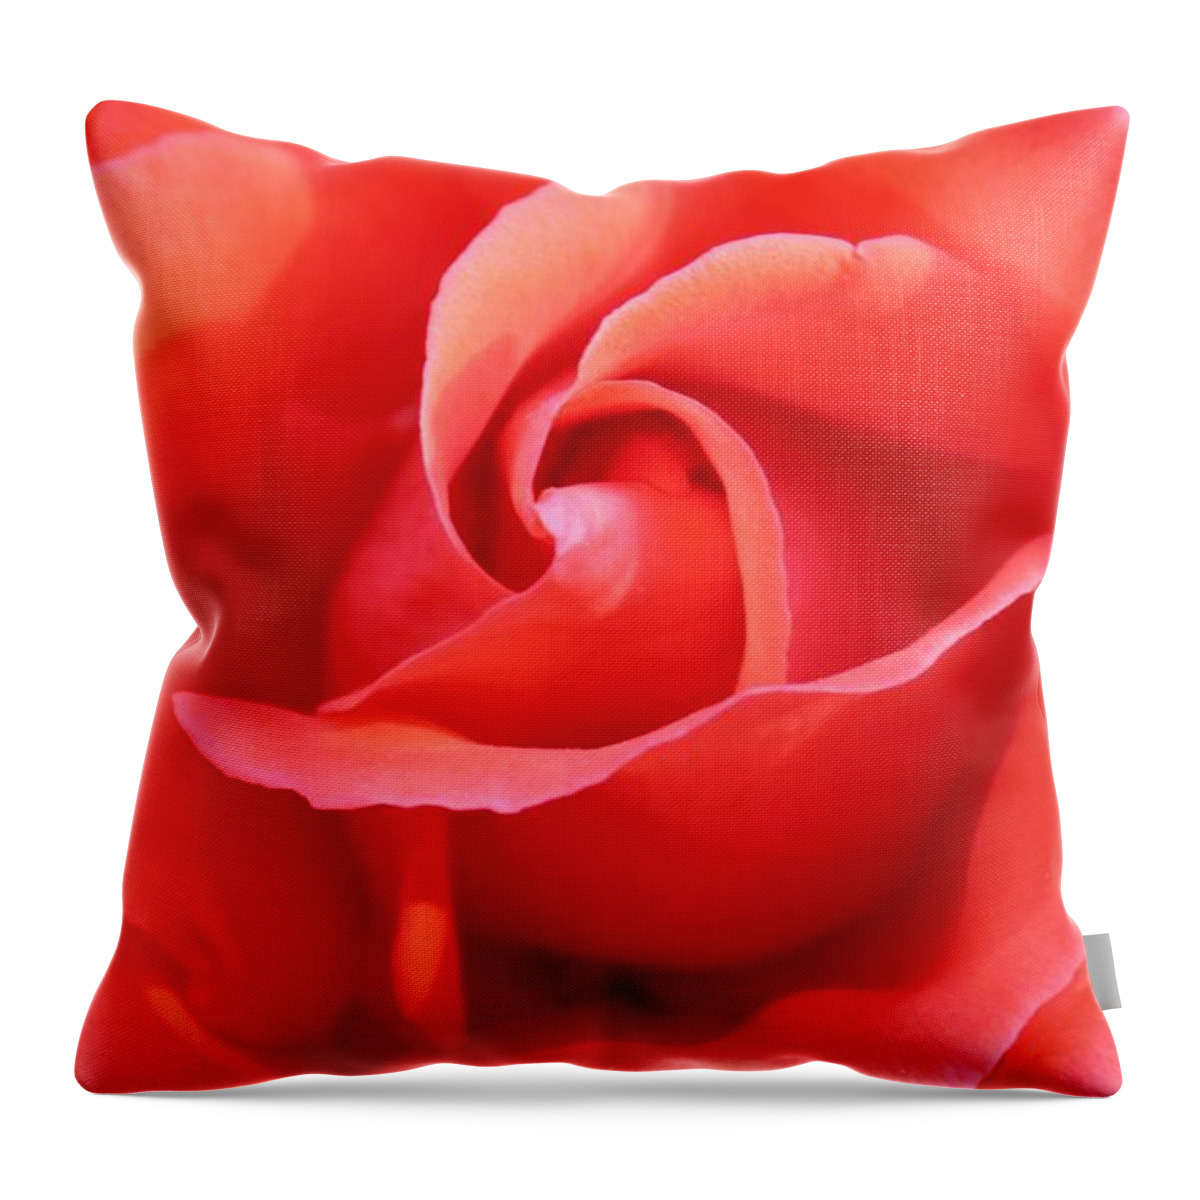 Rose Throw Pillow featuring the photograph Salmon Floral Rose Abstract by Judy Palkimas